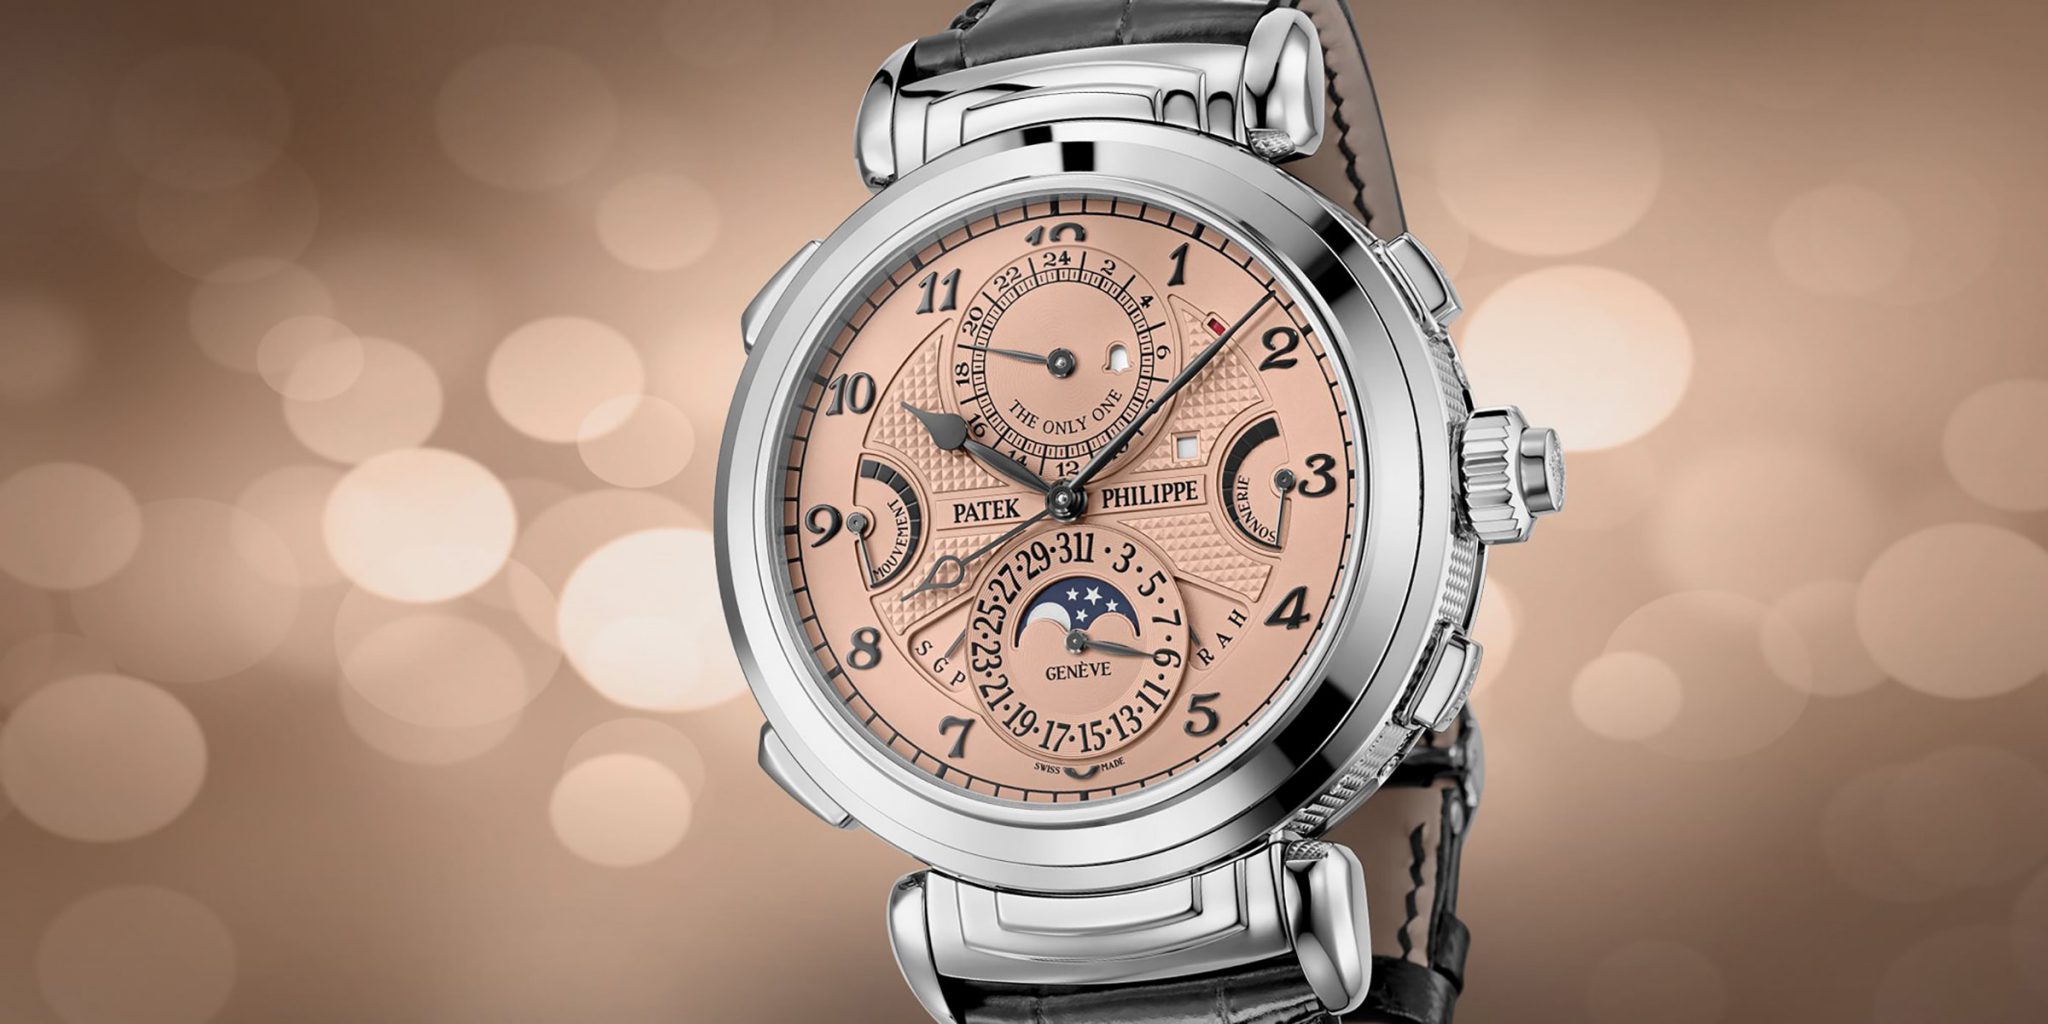 21 Most Expensive Watches In The World (2021 List)